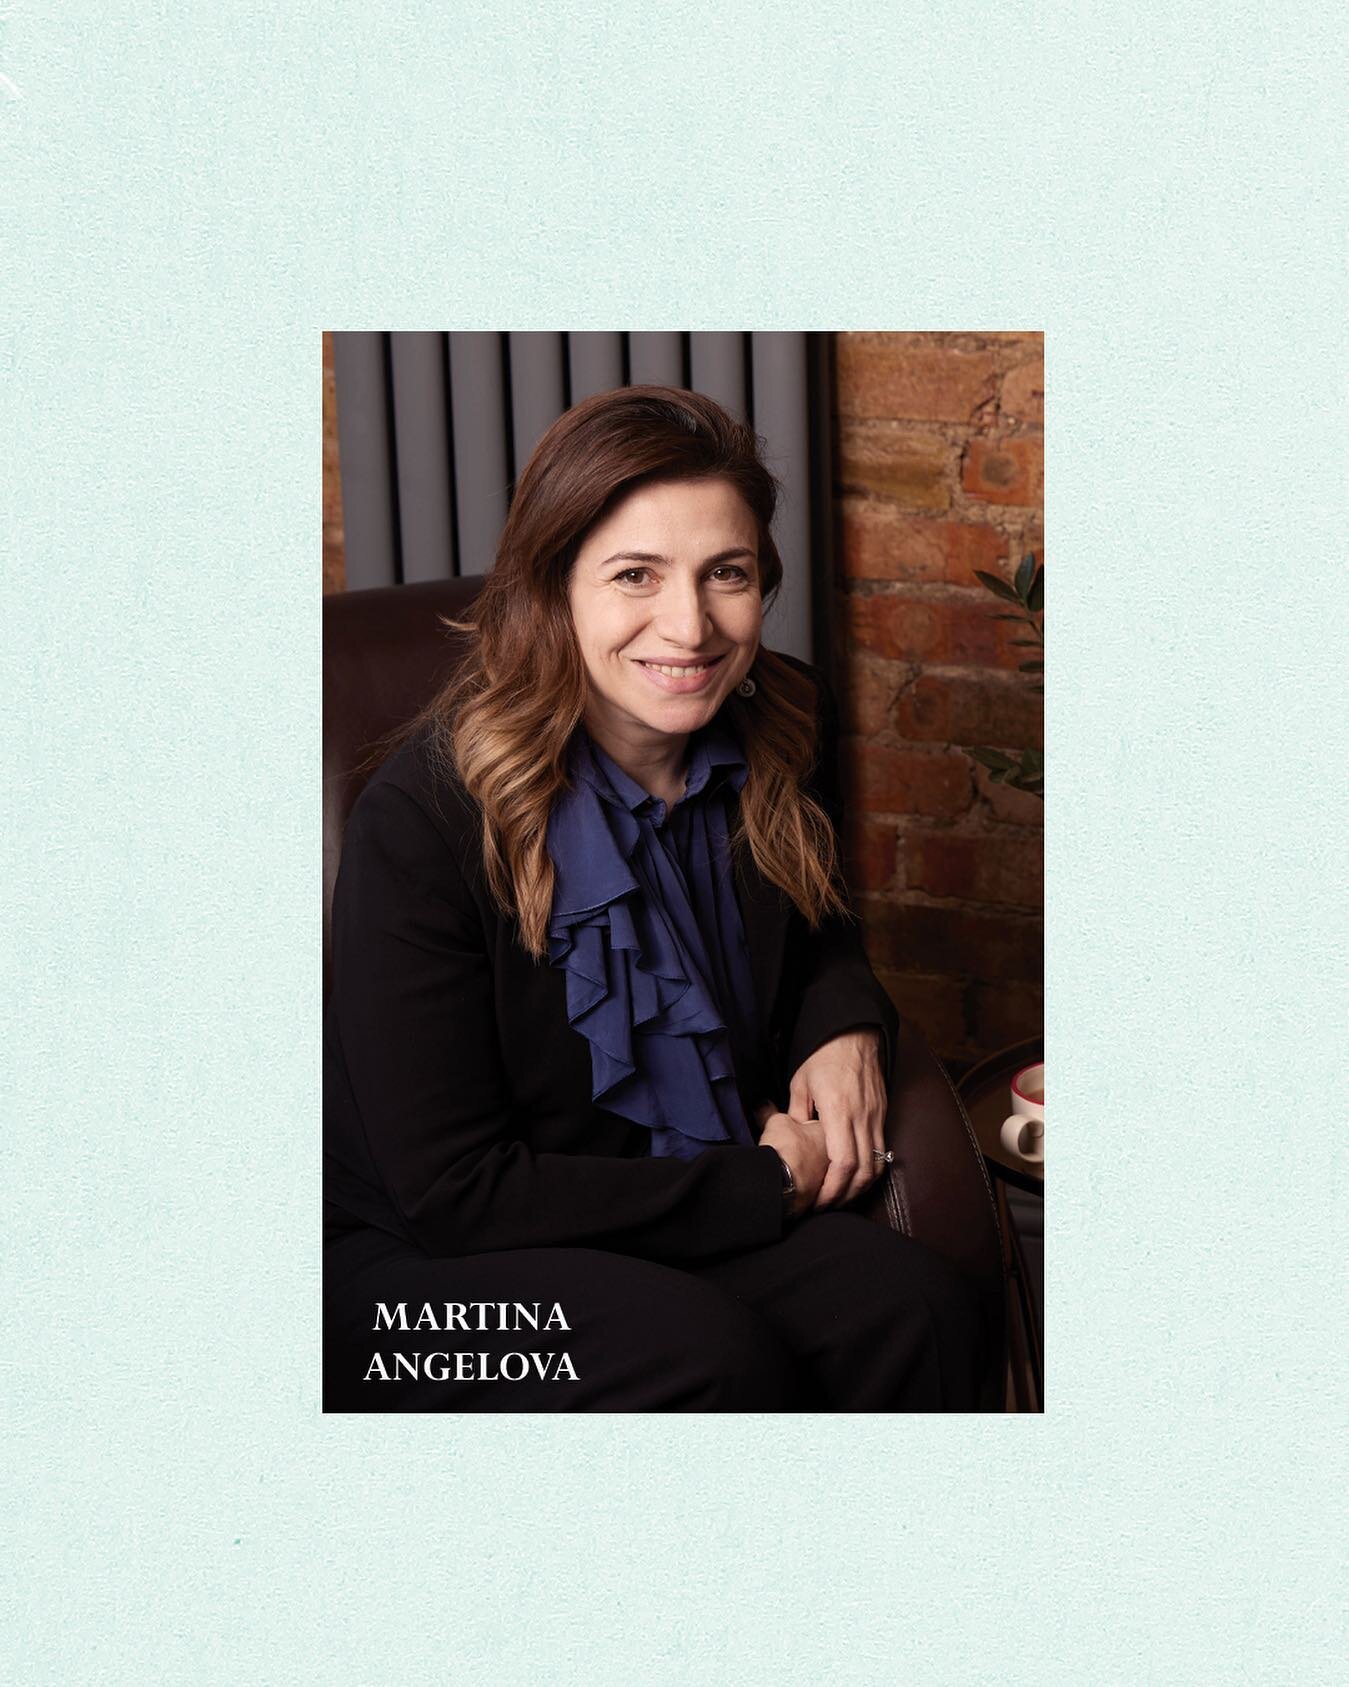 Martina is J'aime's finance guru, with a background in corporate finance and putting complex deals together, and a love for impossible tasks.

&quot;I have always dreamed of a product that was aesthetic, delicious and truly healthy. There are so few 